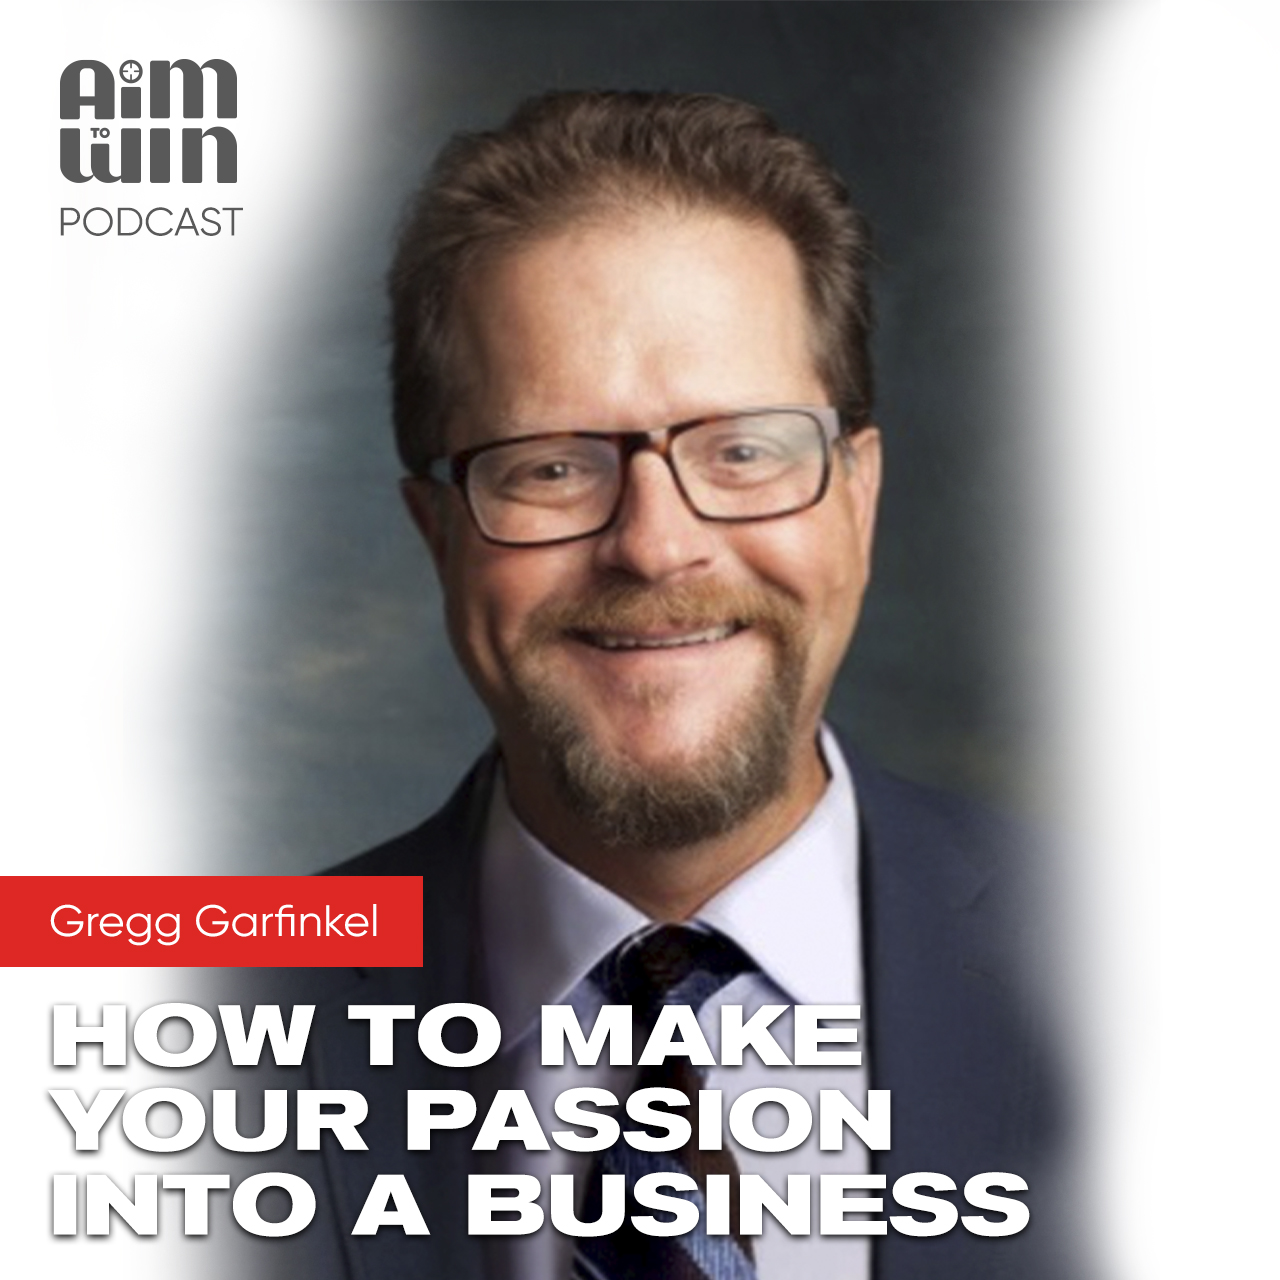 Aim To Win How to make your passion into a business with Gregg Gafinkel